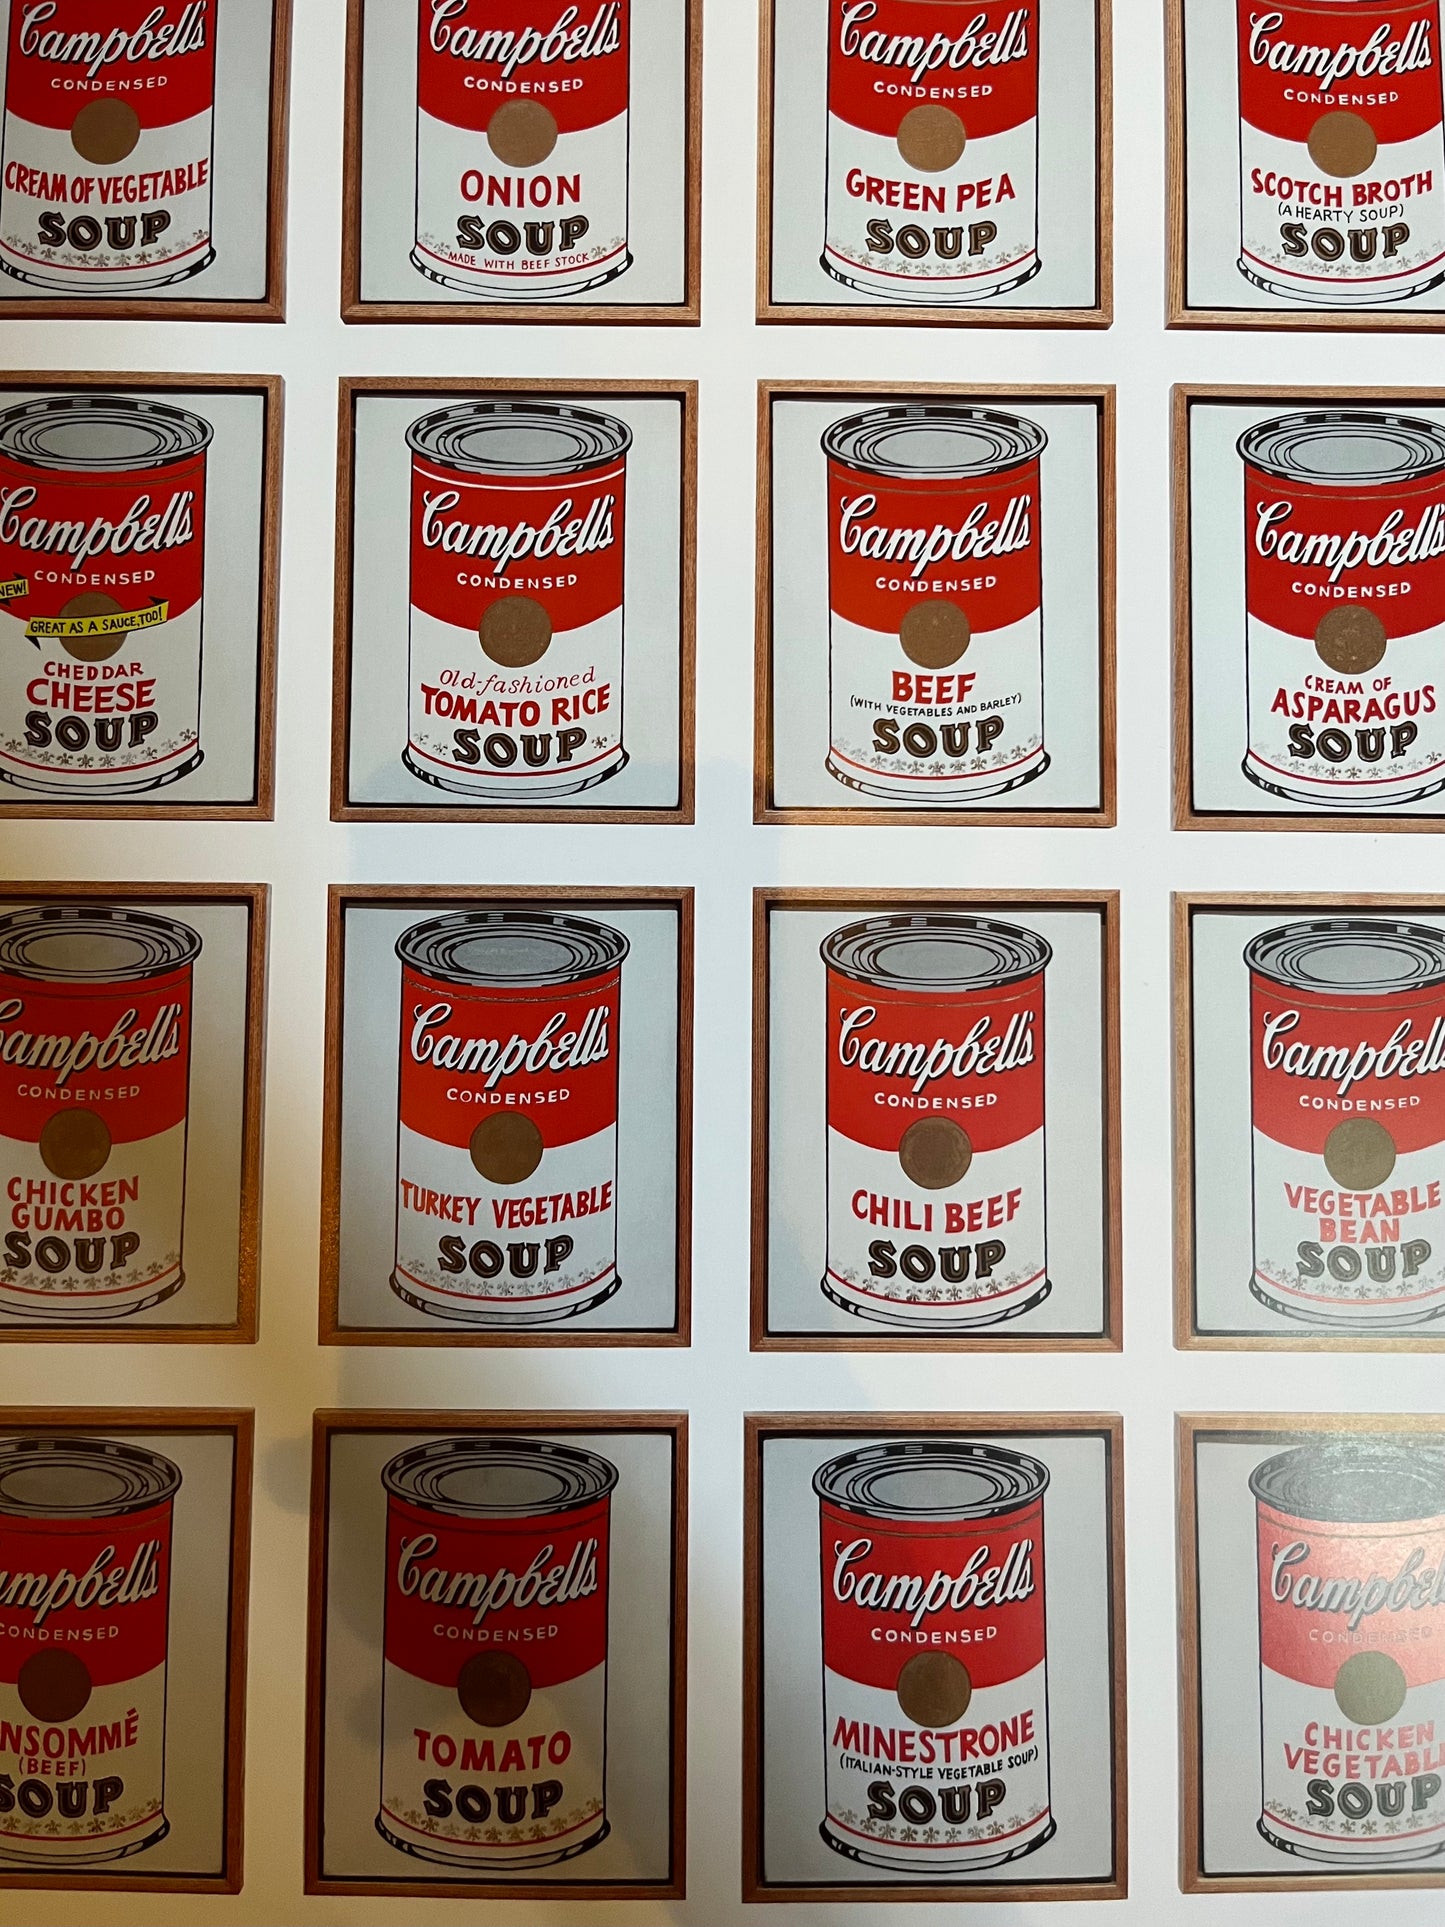 Andy Warhol, Campbell's Soup Cans (1962), litografia offset